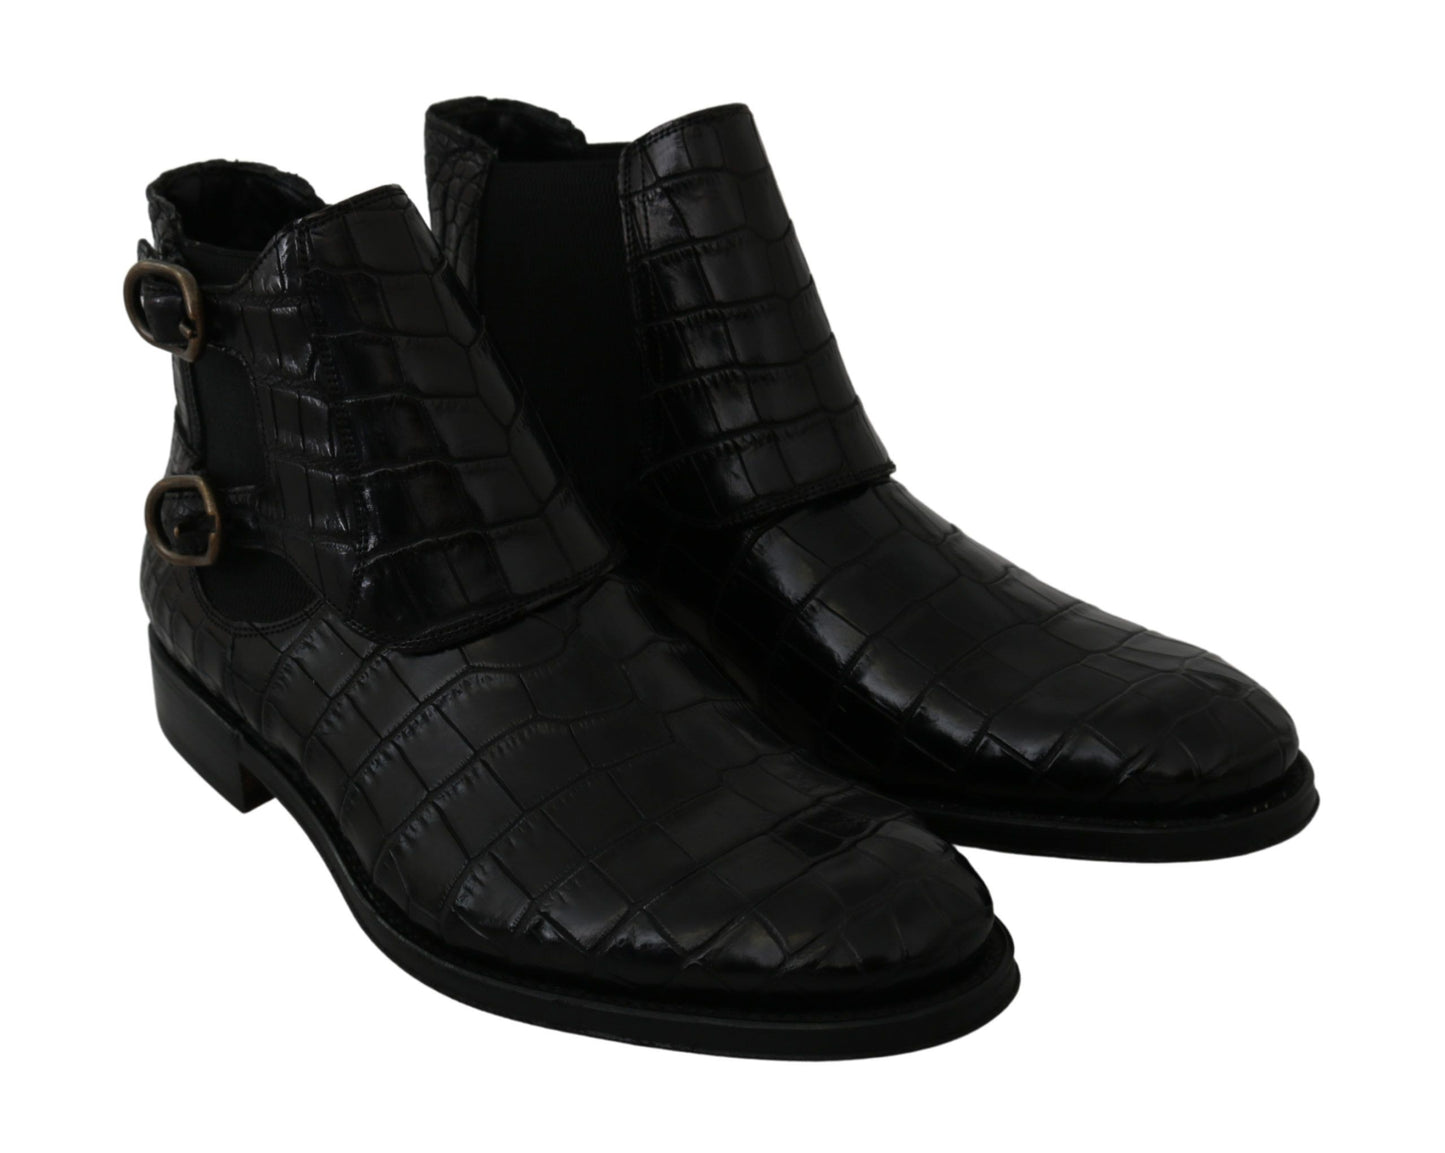 Dolce & Gabbana Black Crocodile Leather Derby Boots Shoes - Designed by Dolce & Gabbana Available to Buy at a Discounted Price on Moon Behind The Hill Online Designer Discount Store